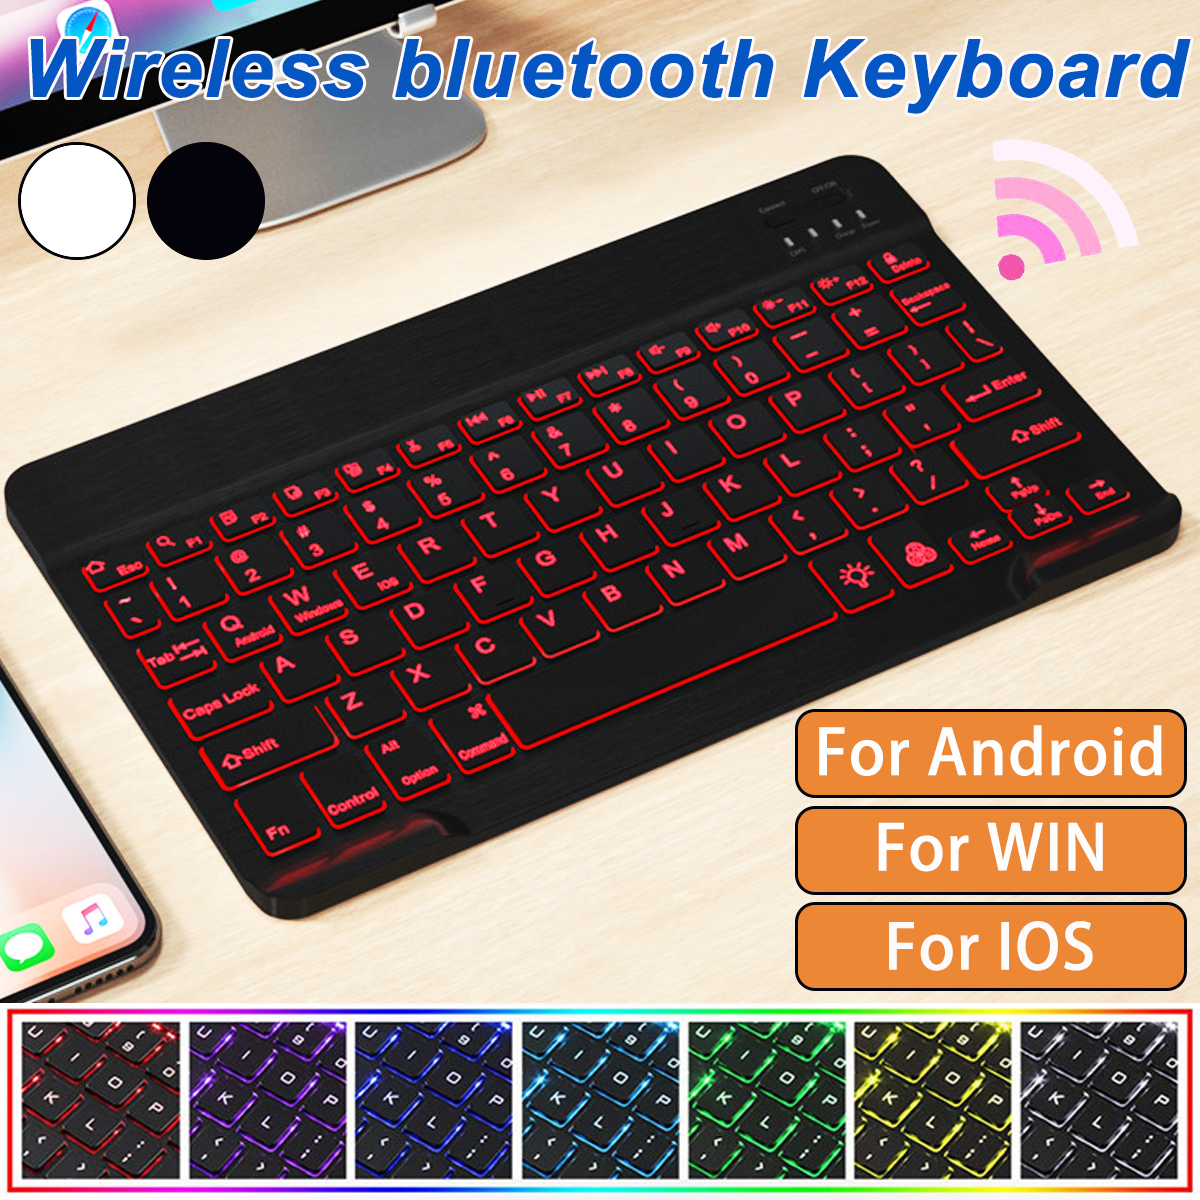 RGB-Backlight-Wireless-bluetooth-Keyboard-for-Android-IOS-and-Windows-Tablet-1960970-1